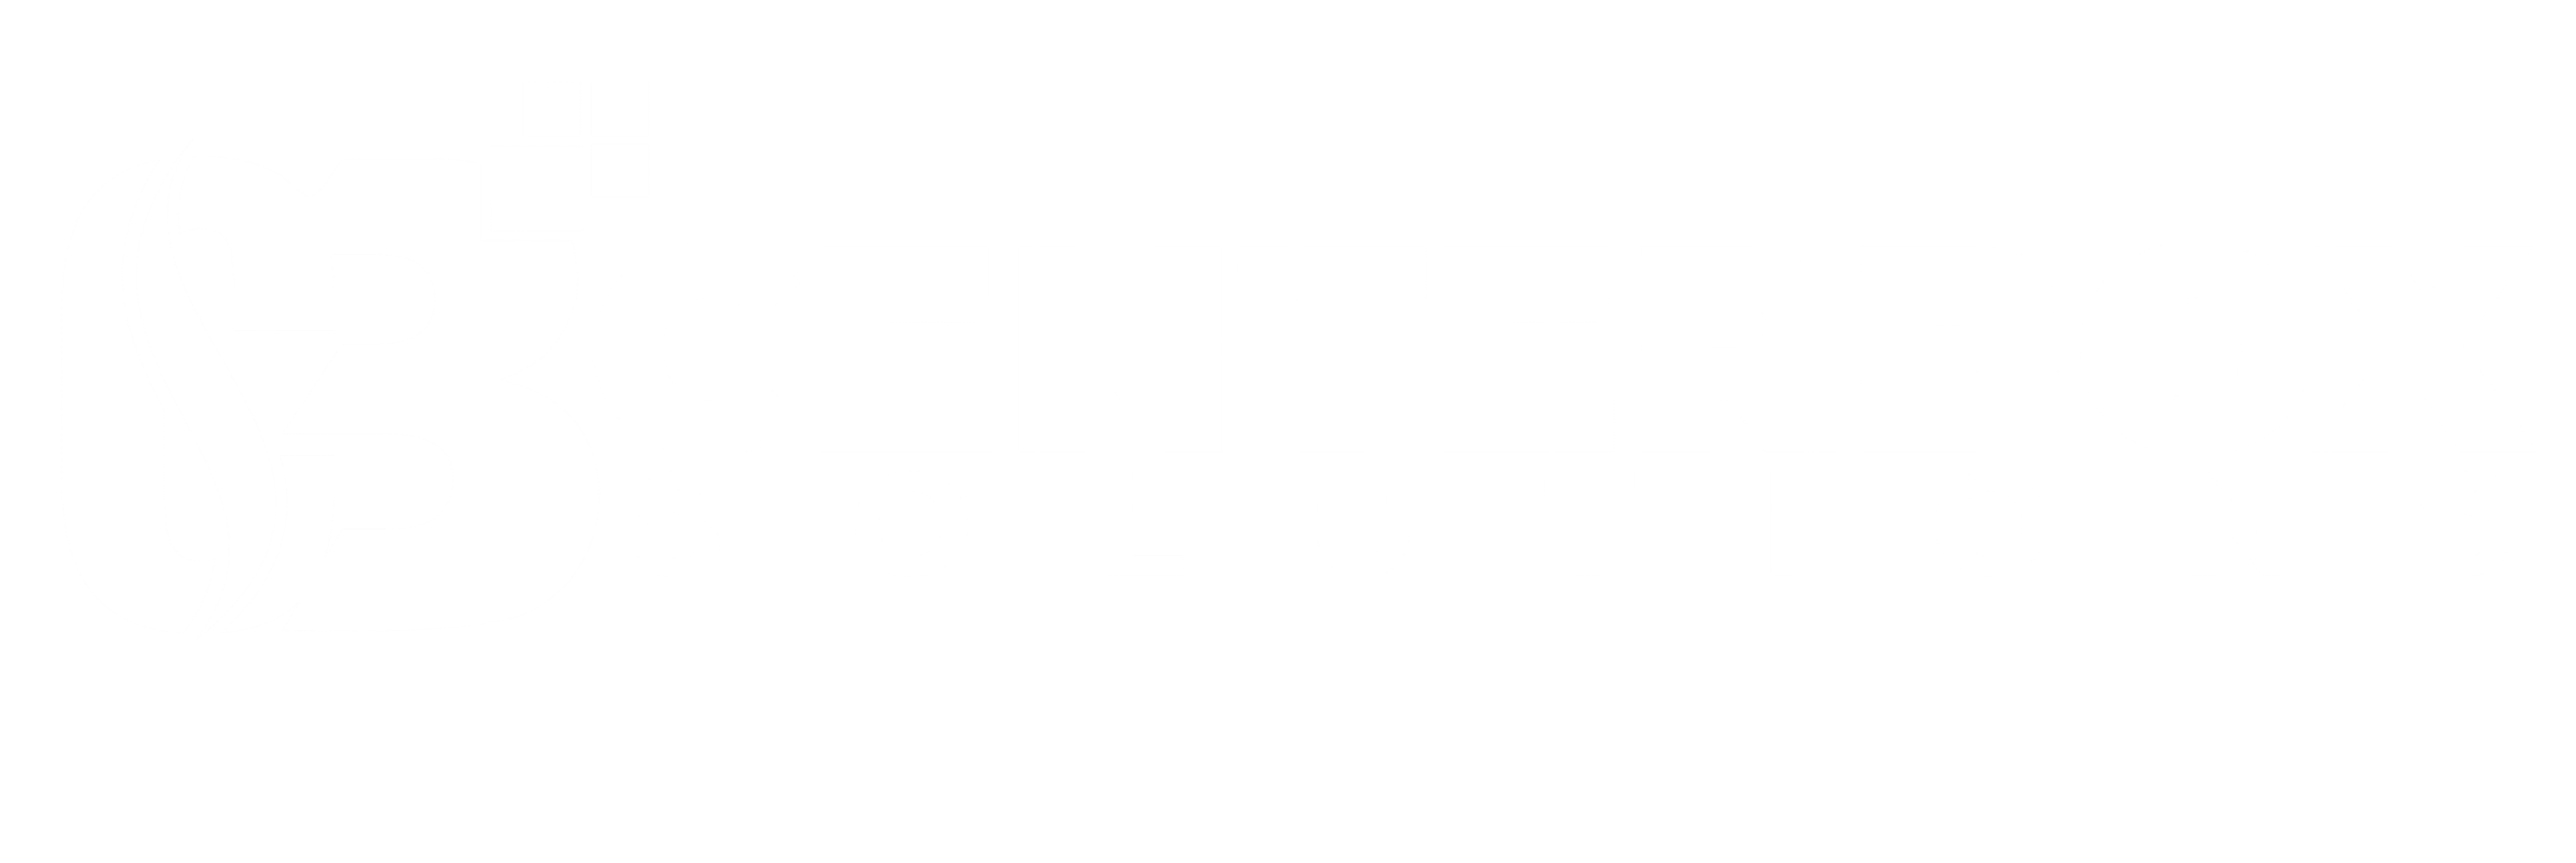 CenterBoxSolutions